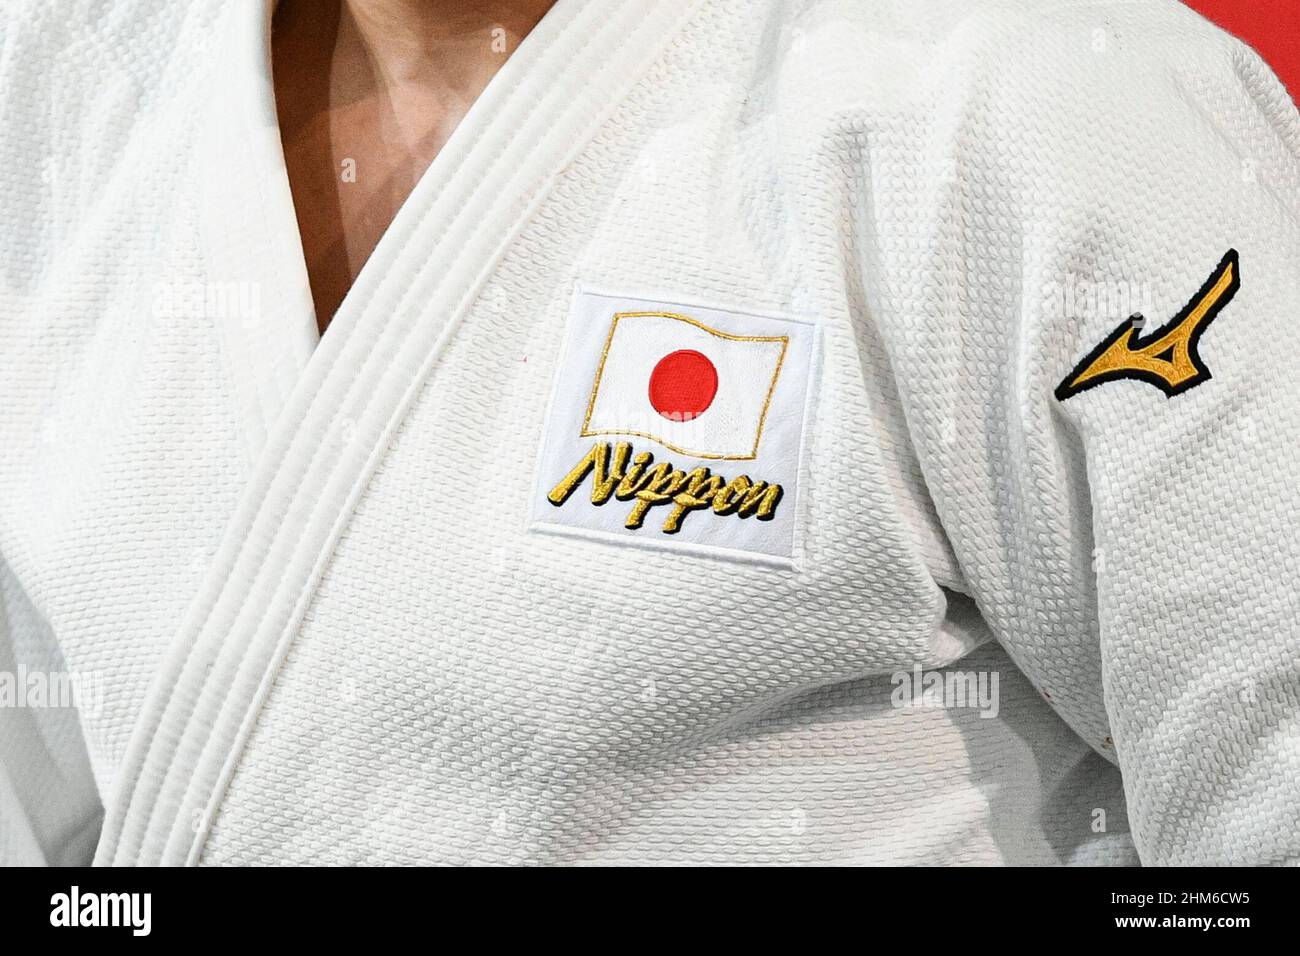 Illustration picture shows a white Mizuno judogi/kimono from Japan of a  judoka/judo fighter with the Japanese flag (Nippon logo team) during the  Paris Grand Slam 2022, IJF World Judo Tour on February